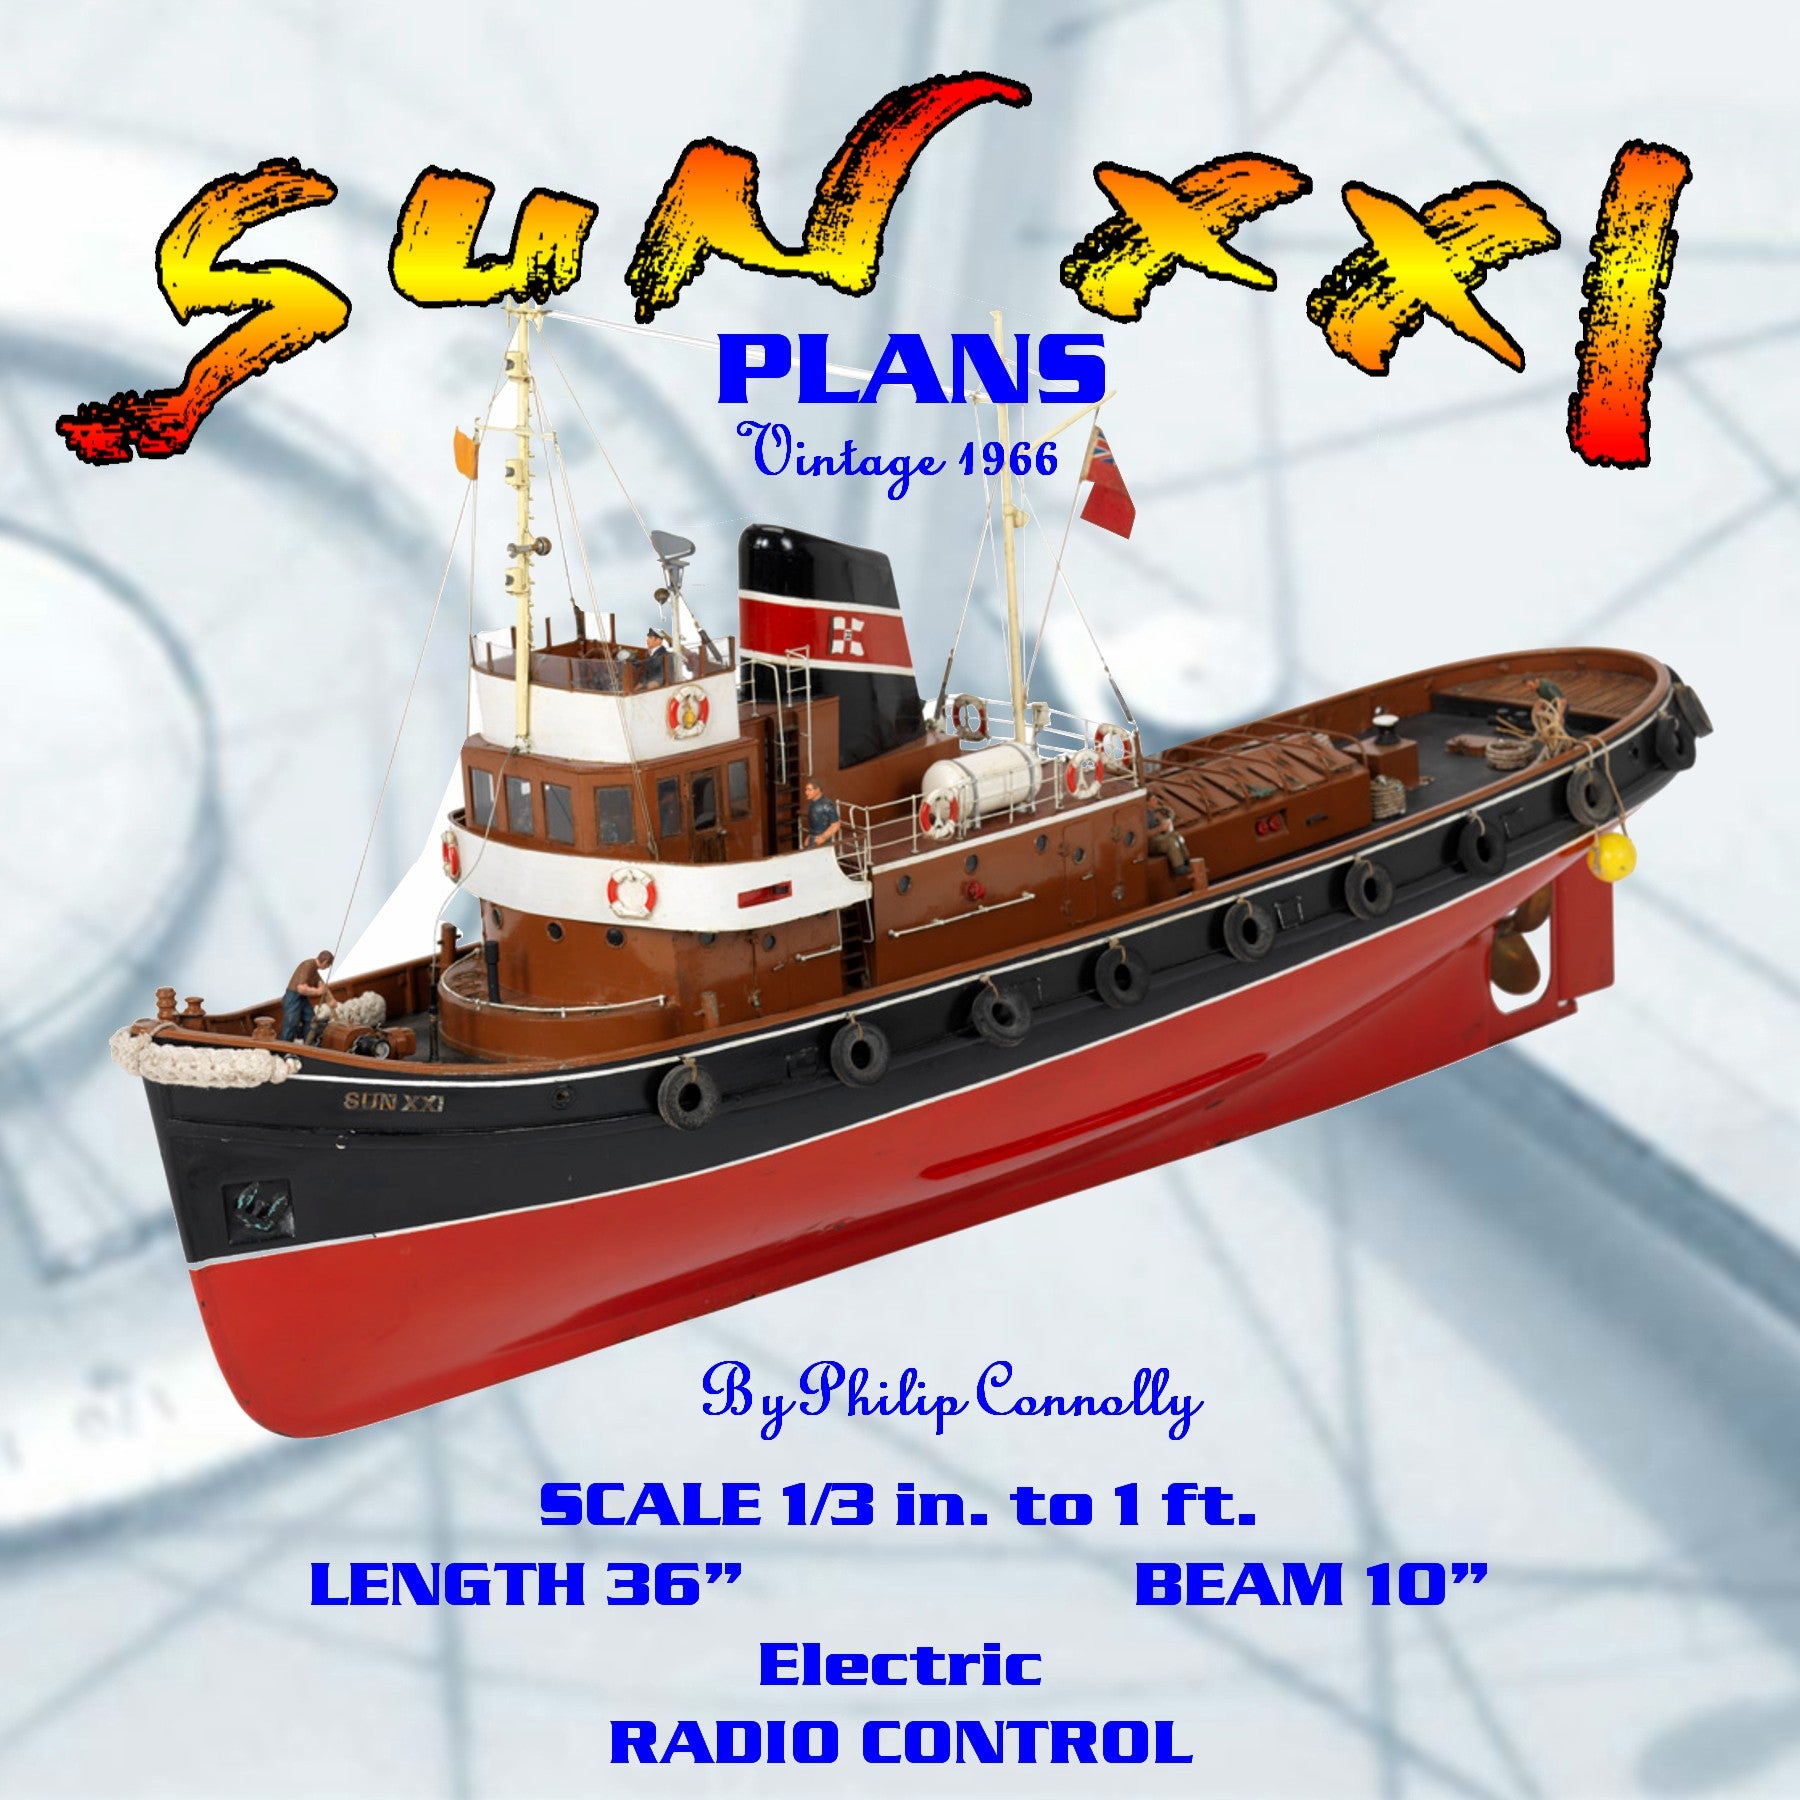 full size printed plan vintage 1966 modern tug model scale 1/3 in. to 1 ft. "sun xxi" for radio control